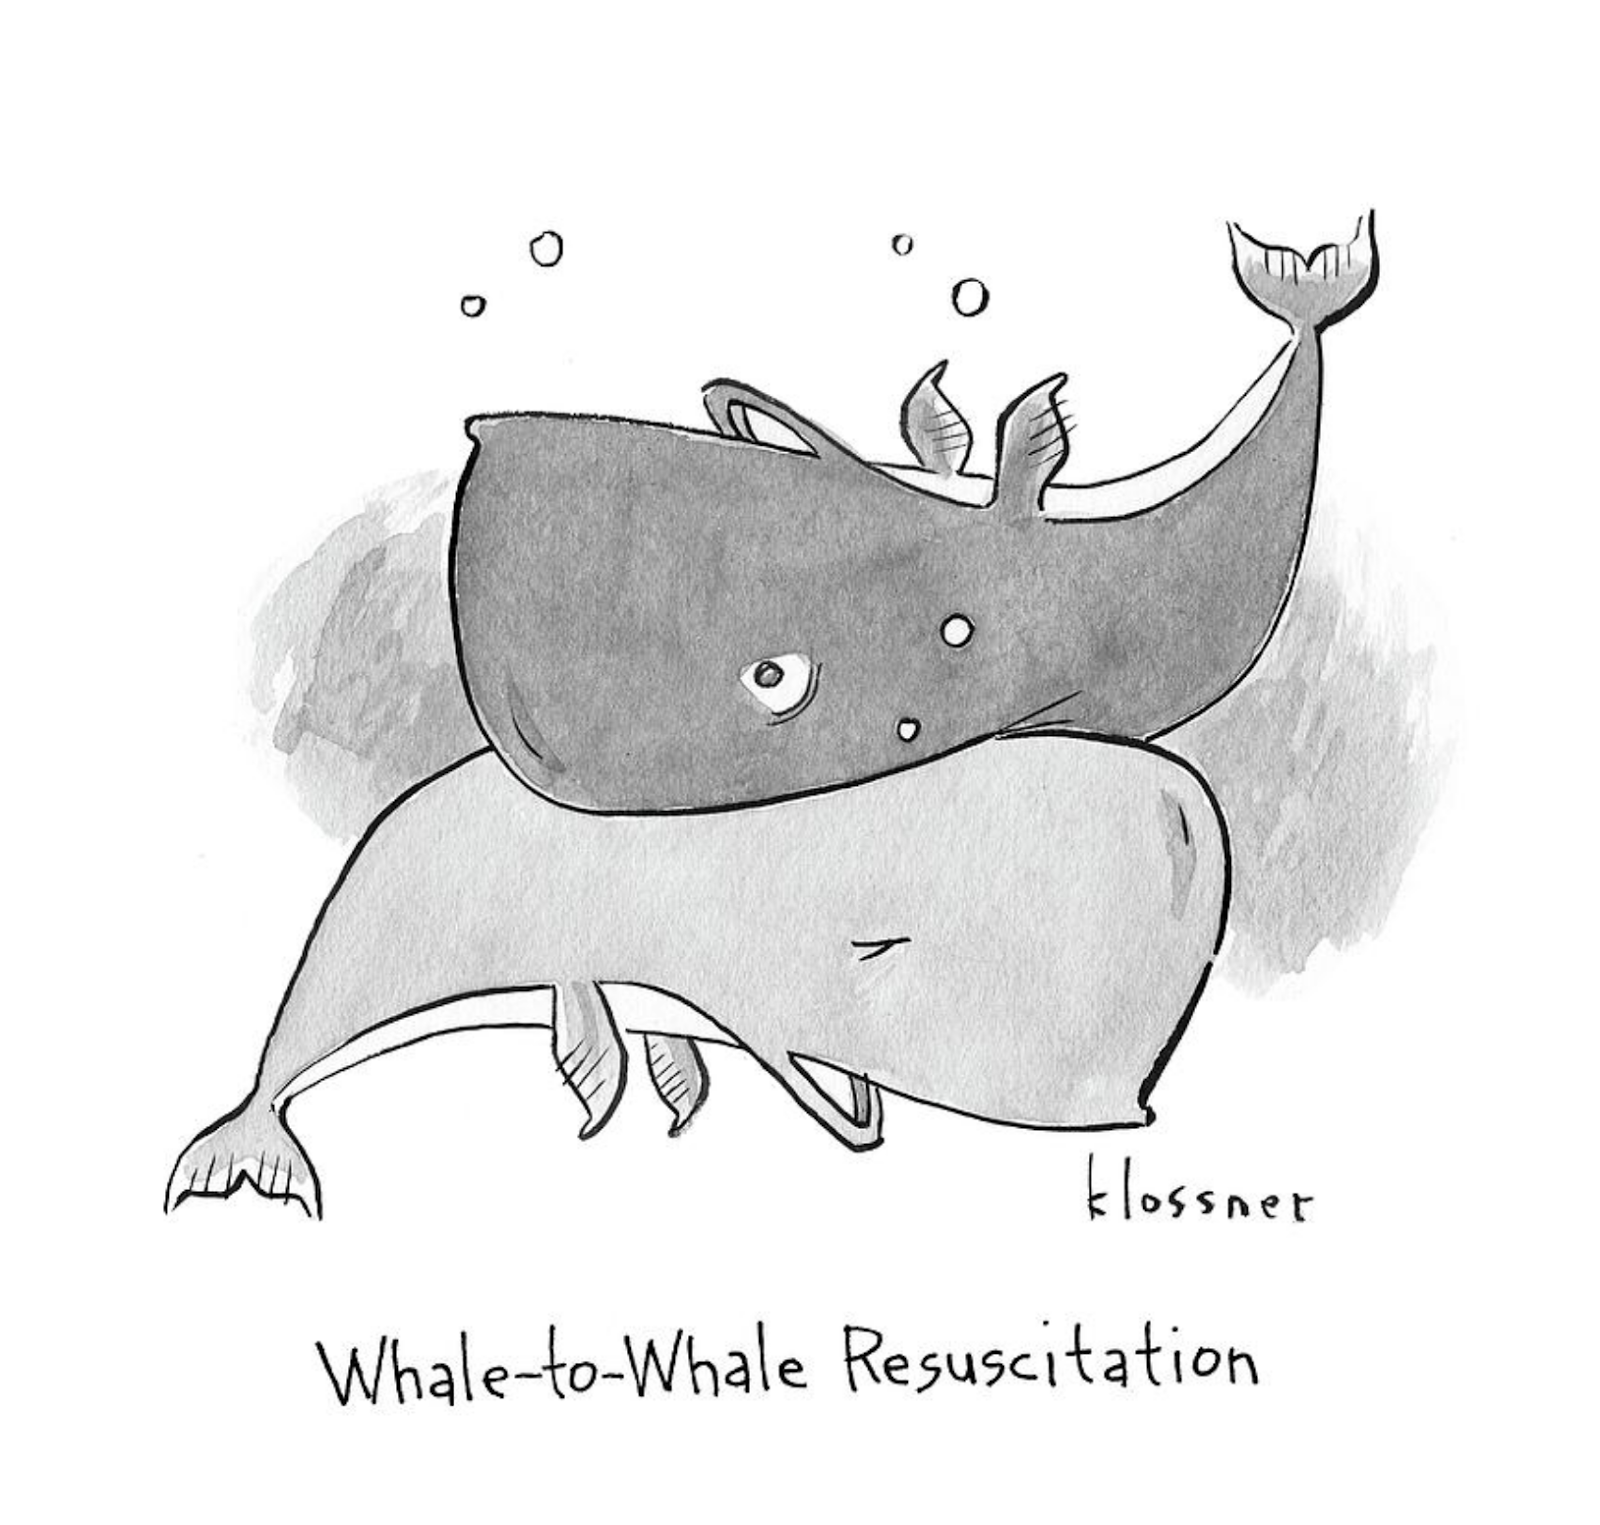 Attempted Bloggery: John Klossner's Whale-to-Whale Resuscitation